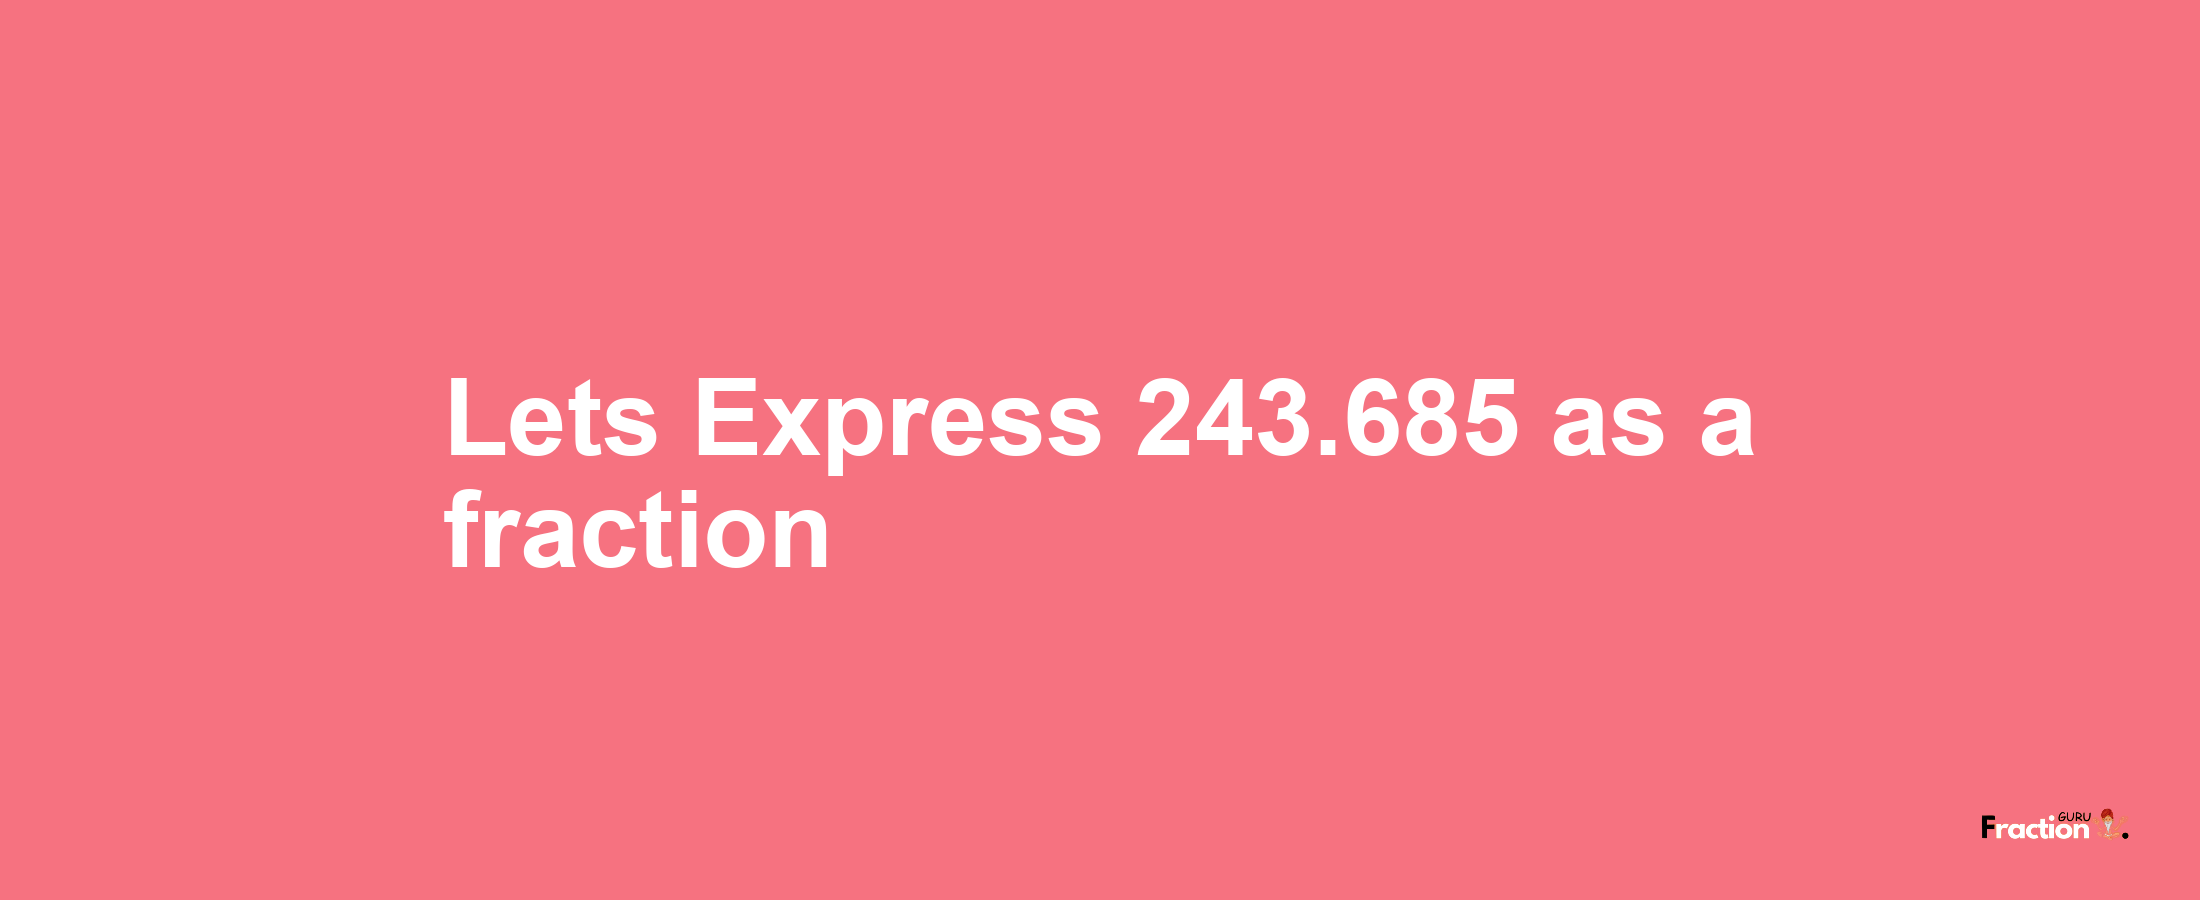 Lets Express 243.685 as afraction